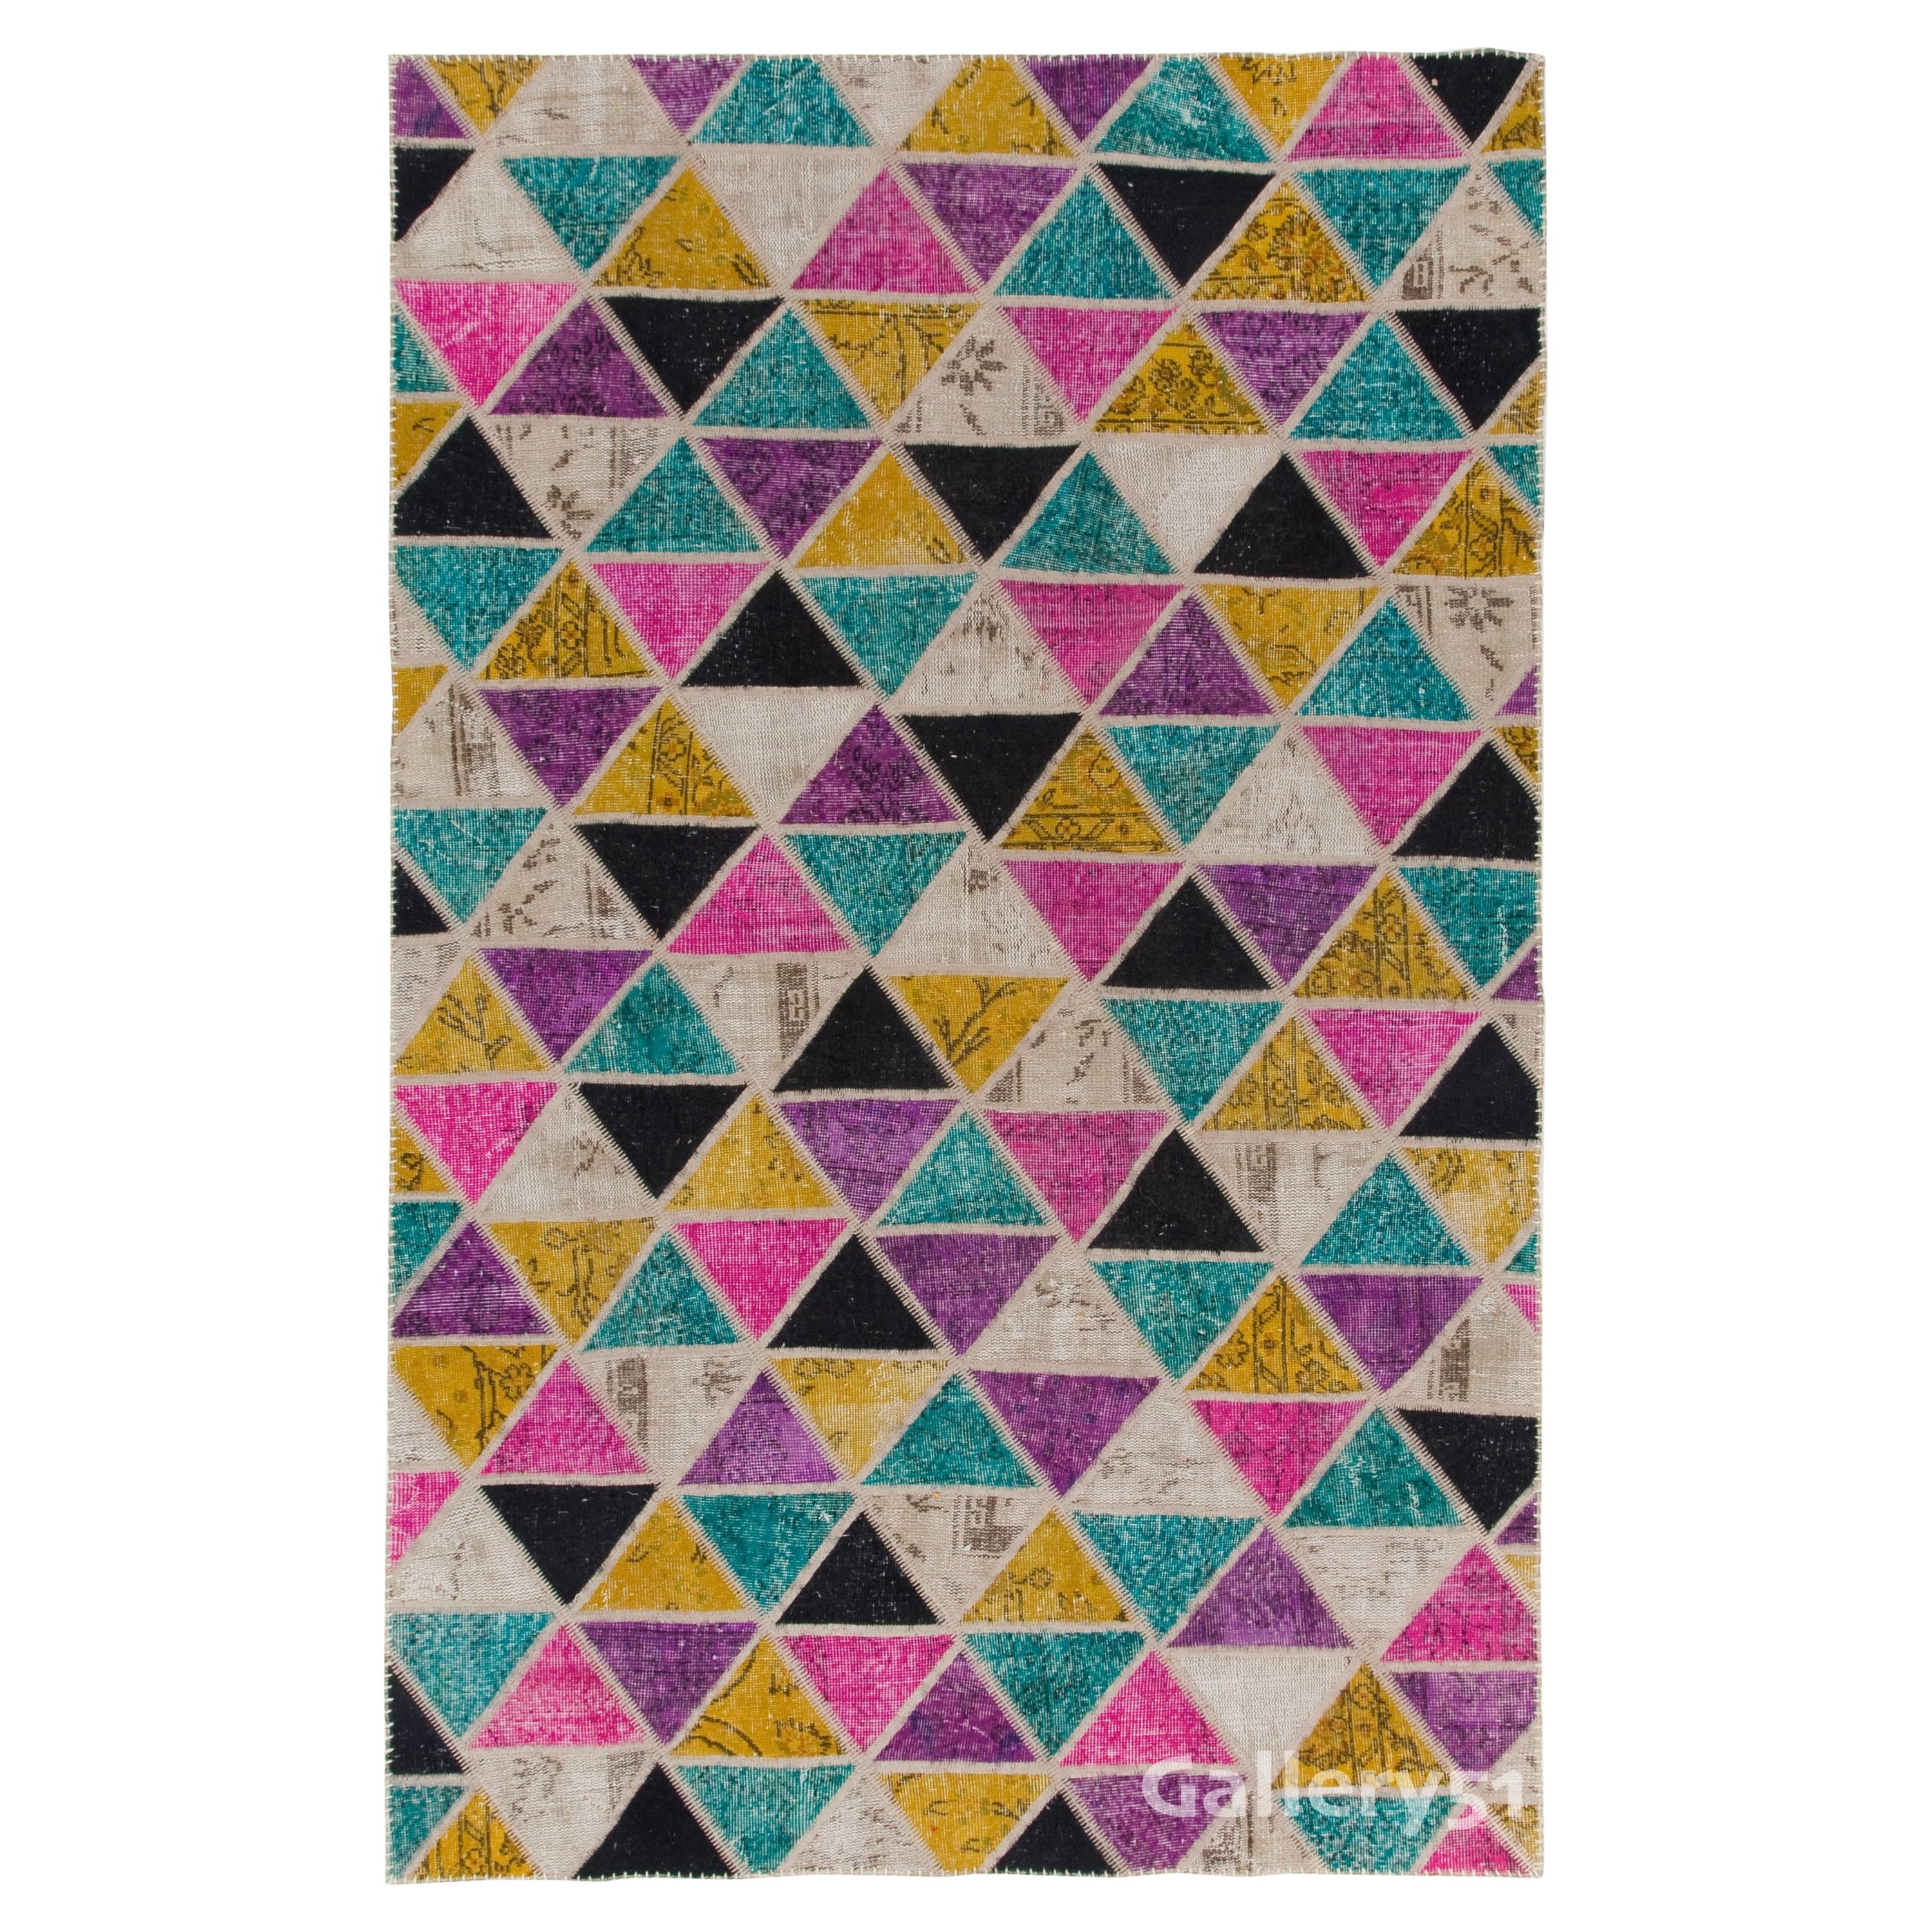 5.5x8.7 Ft Handmade Patchwork Rug with Triangles Design Custom Options Available For Sale